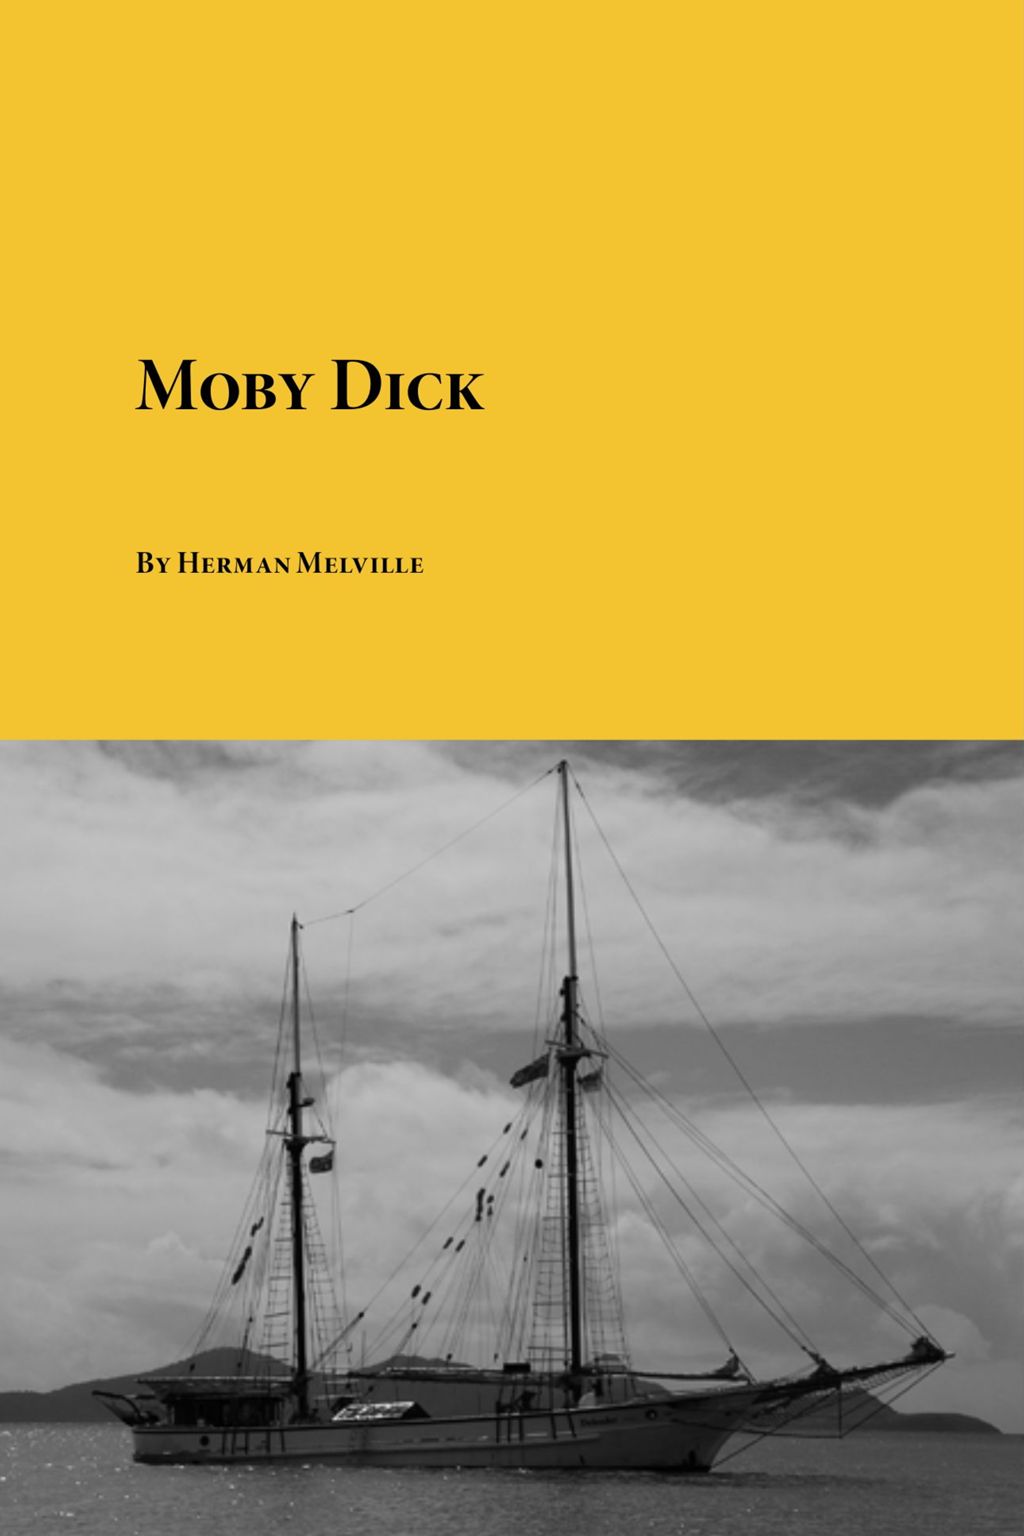 Miniature of Moby-Dick